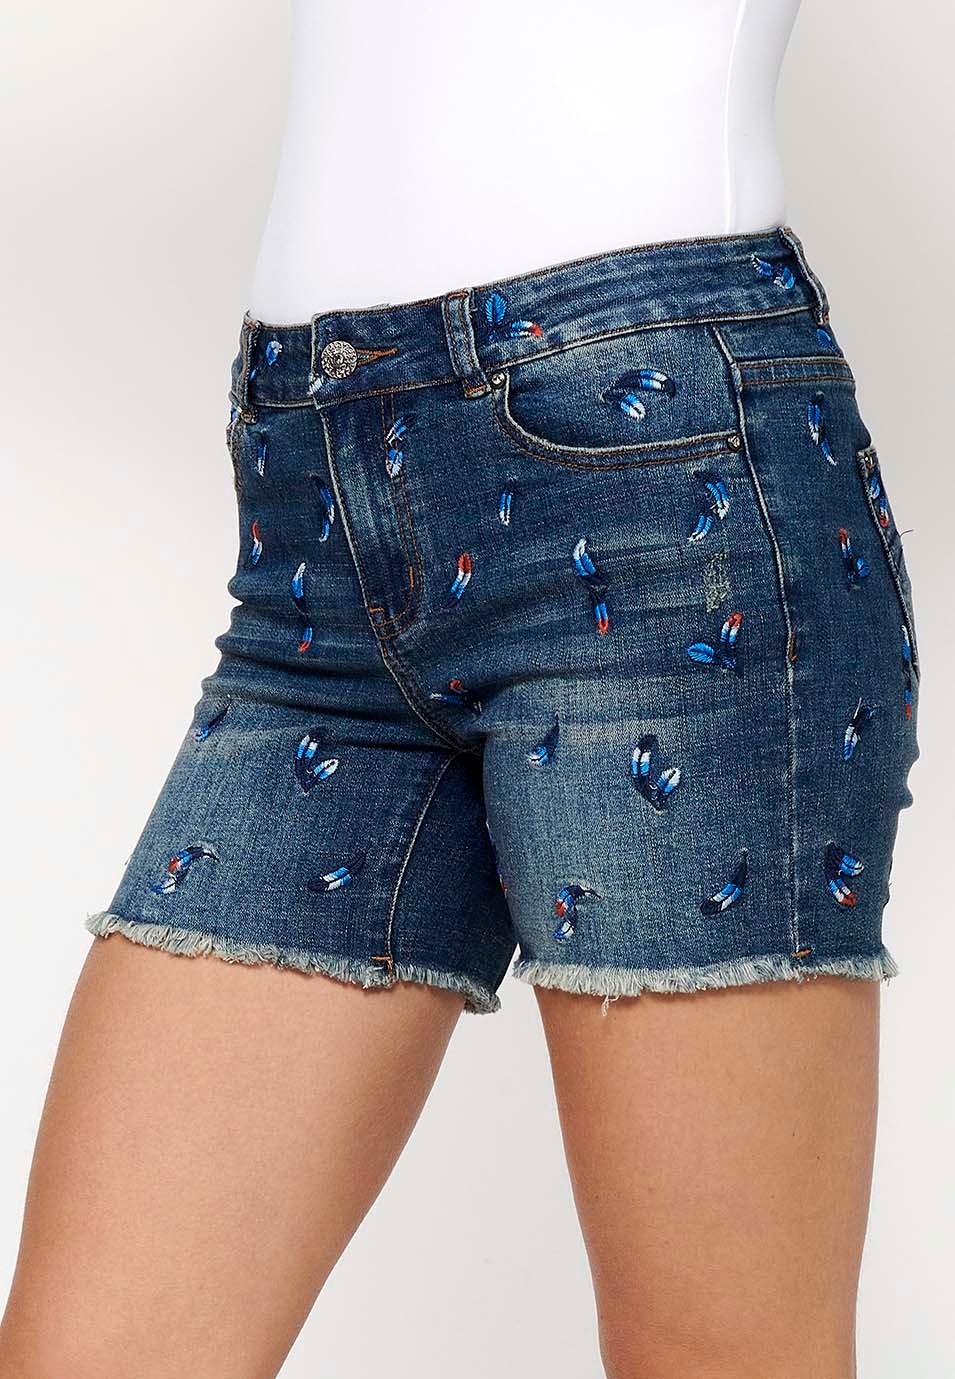 Denim shorts with front zipper and button closure and embroidered fabric with five pockets, one blue pocket pocket for women 2